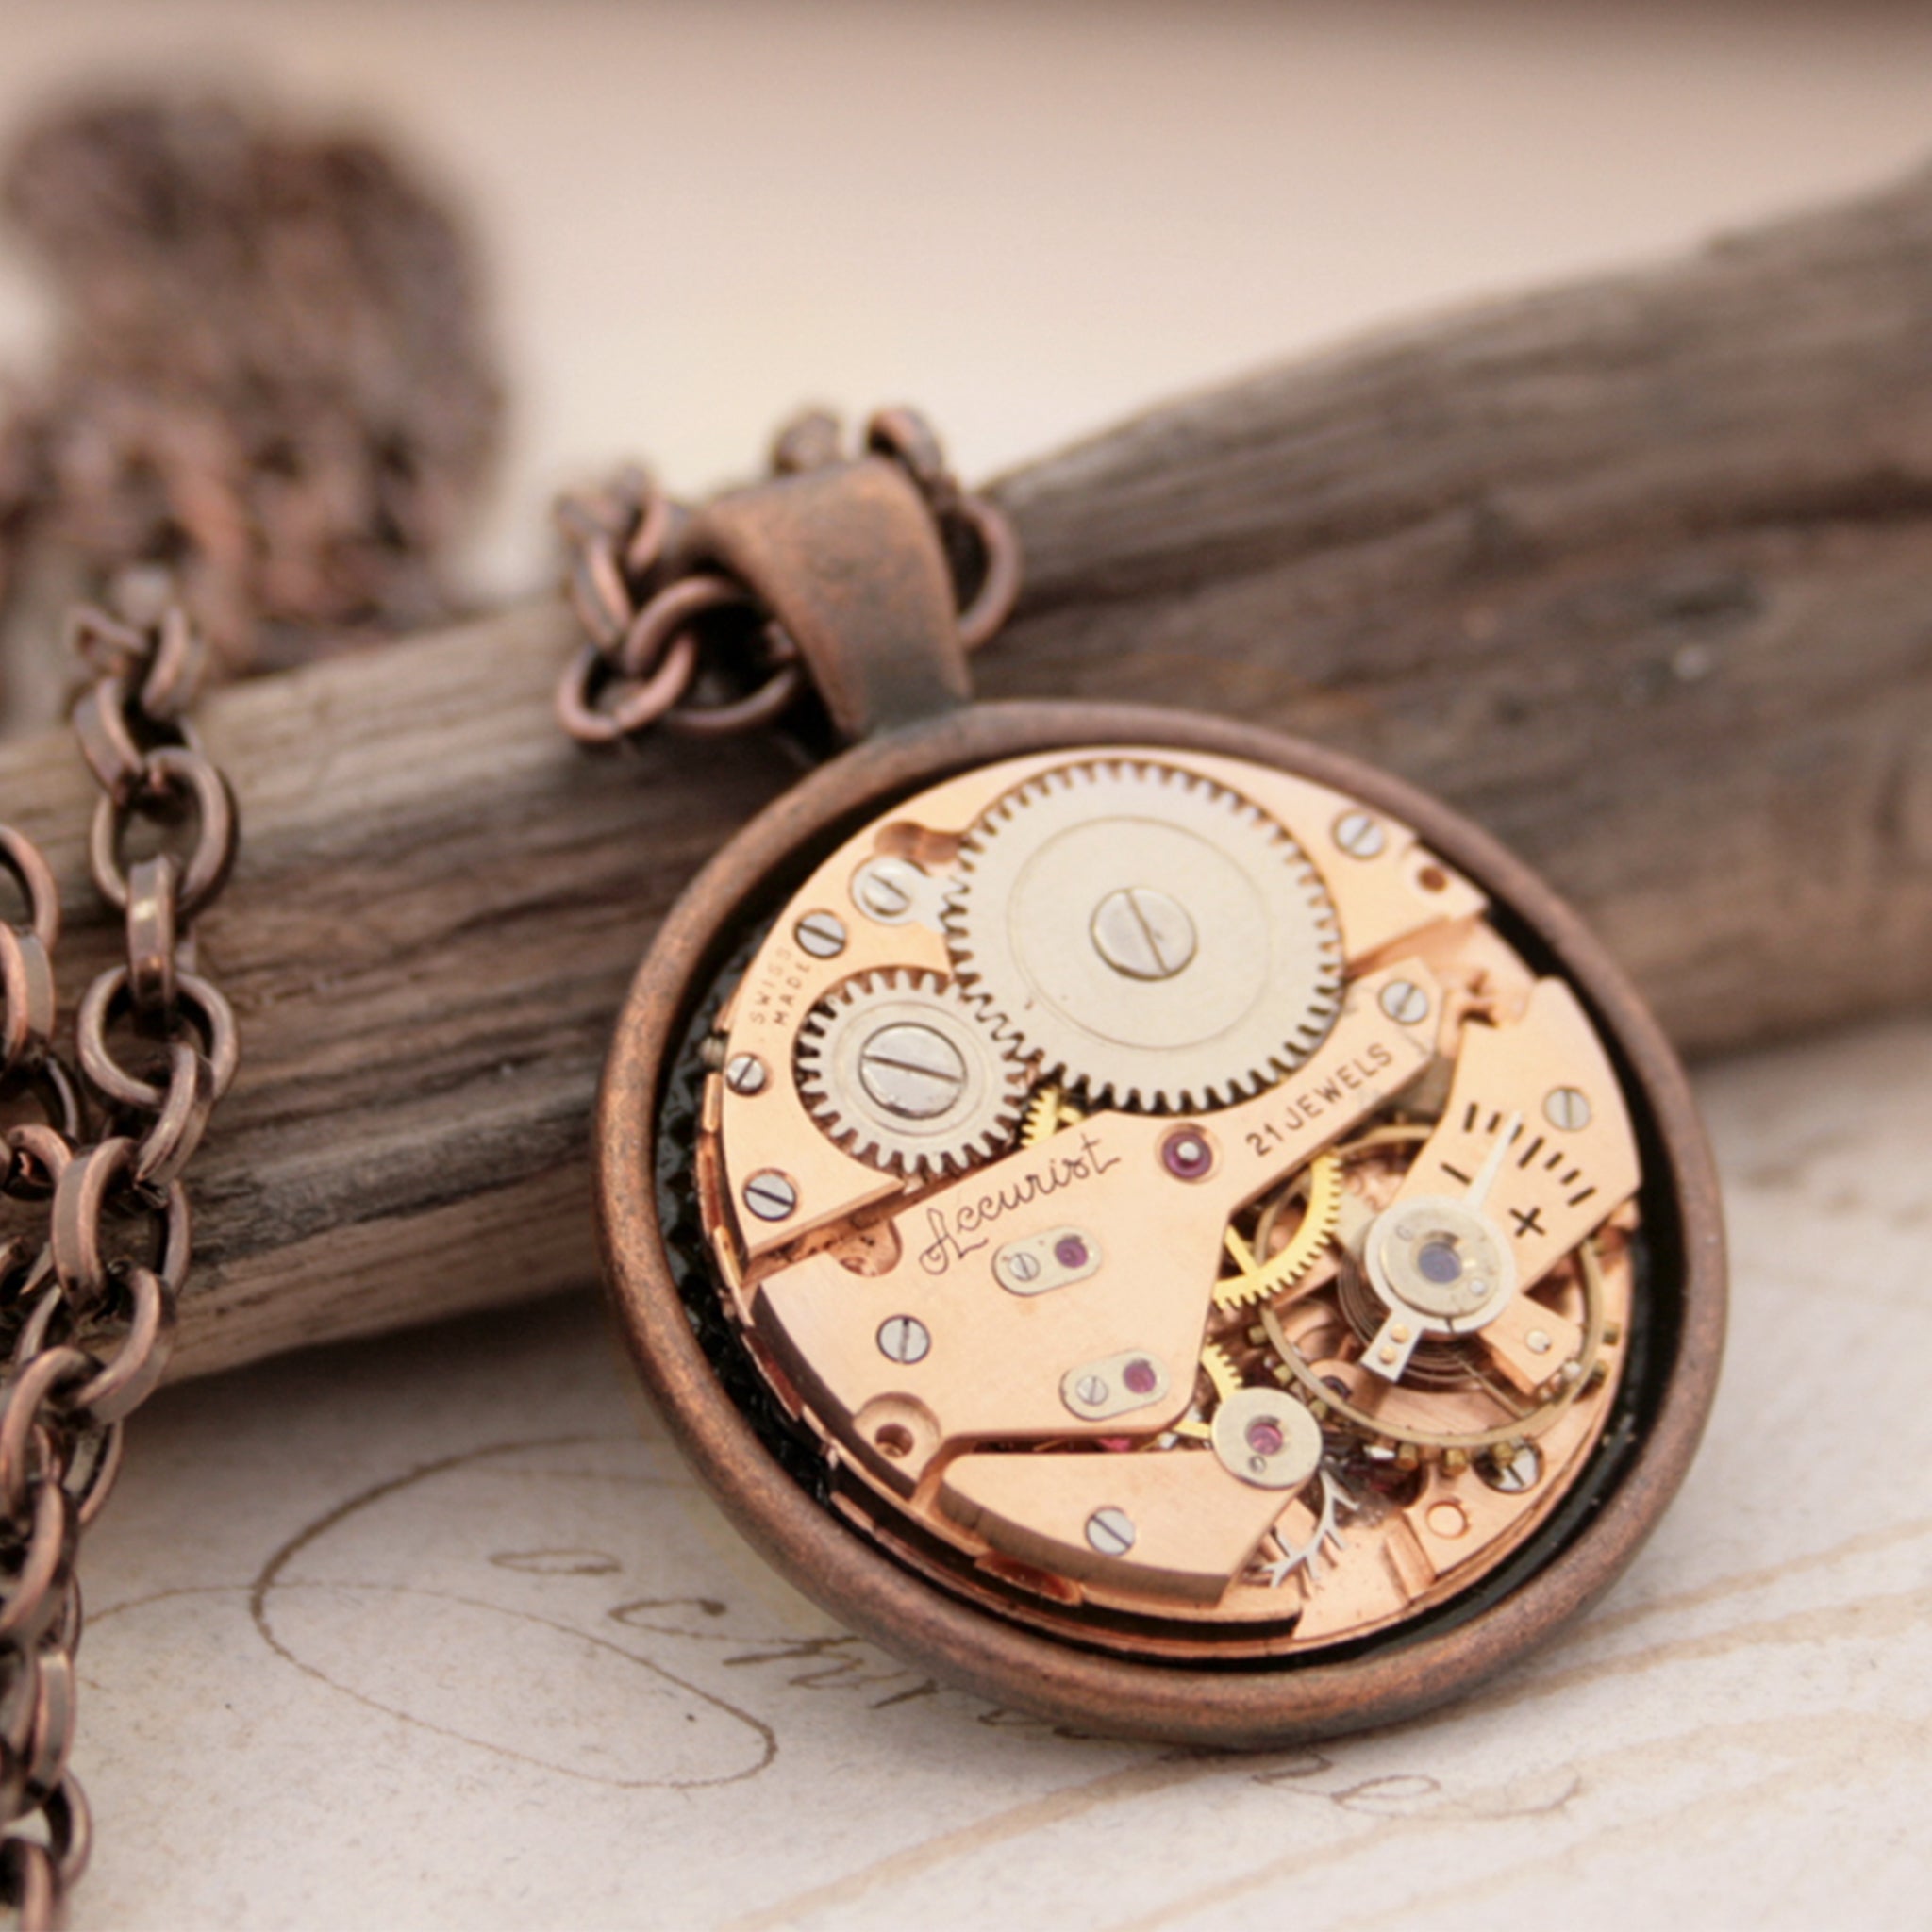 Copper Pendant Necklace in Steampunk Style with Watch Mechanism